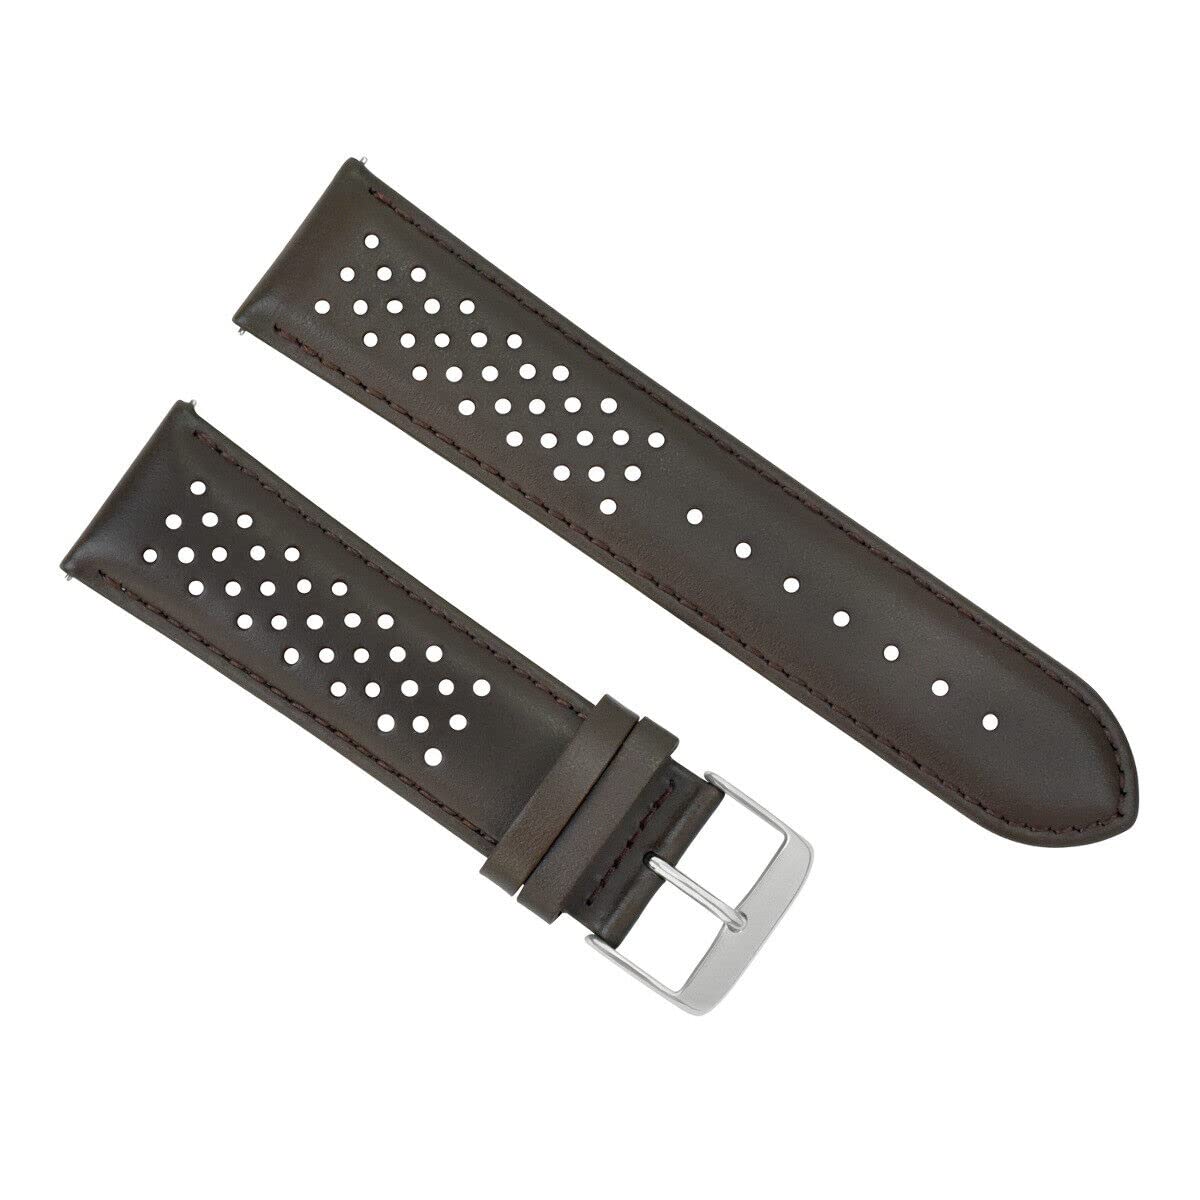 Ewatchparts 21MM COMPATIBLE WITH TAG HEUER CARRERA PERFORATED LEATHER STRAP WATCHBAND QUICK RELEASE BLAC